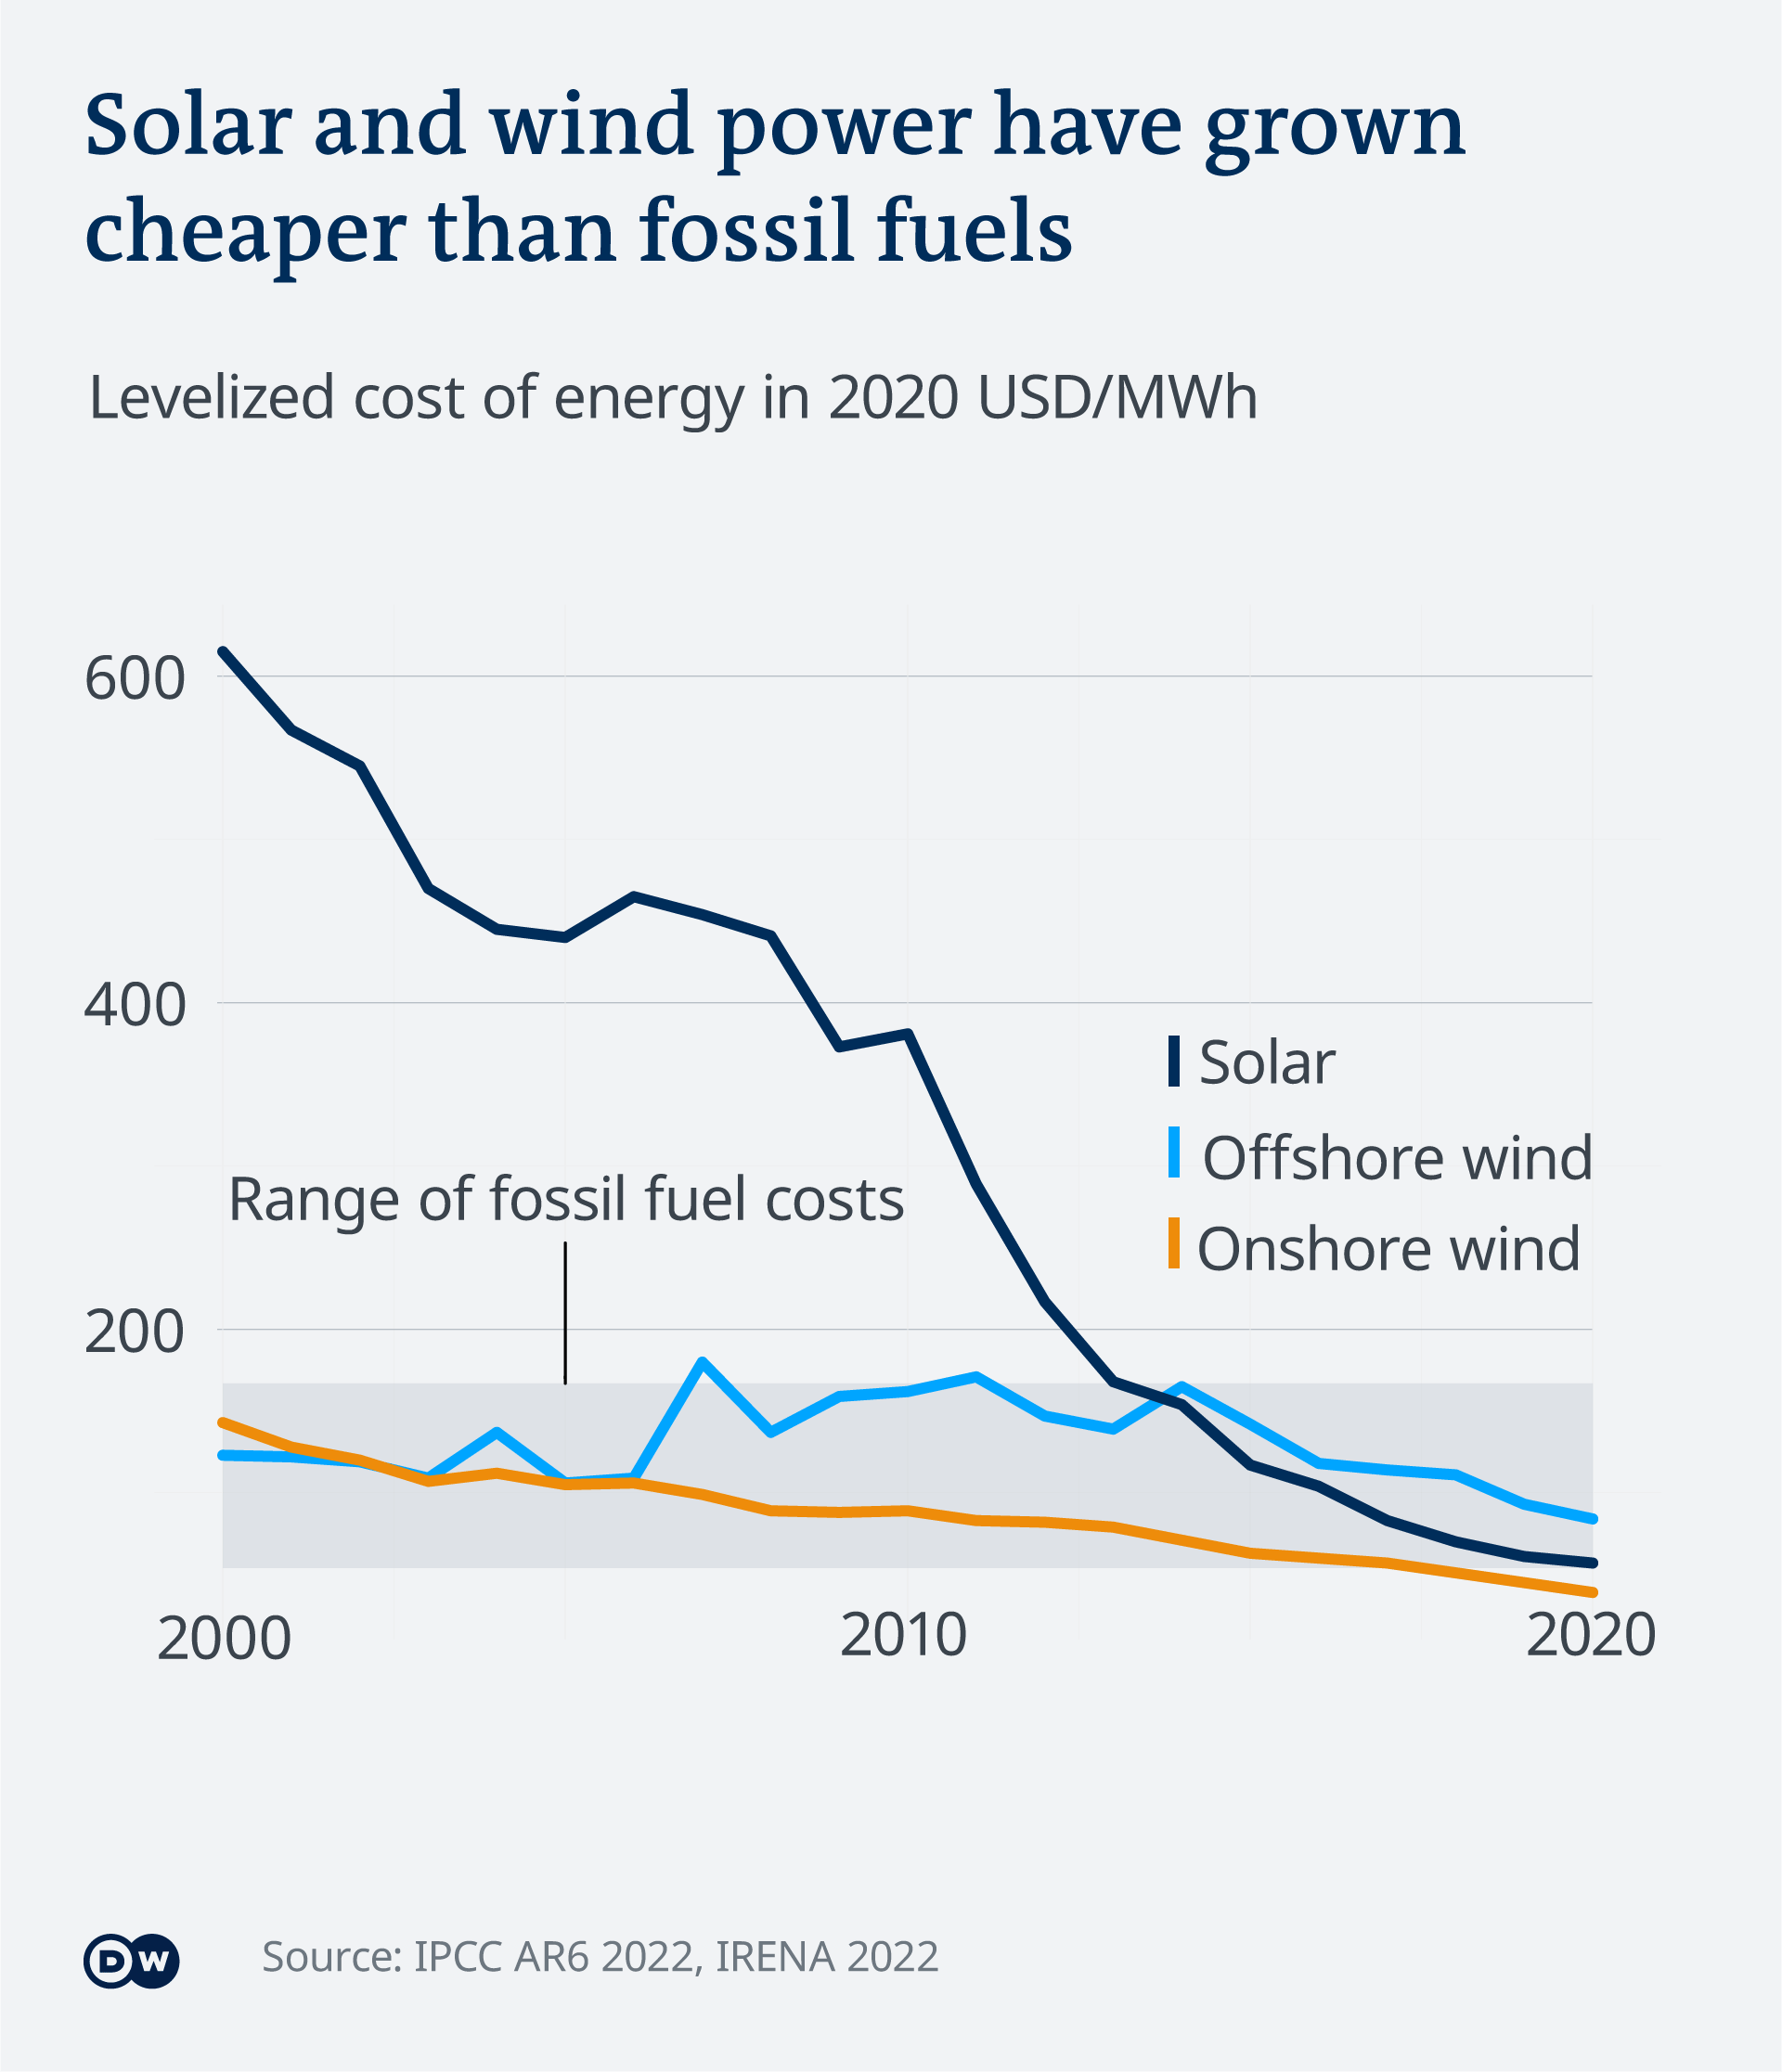 burning of fossil fuels graph